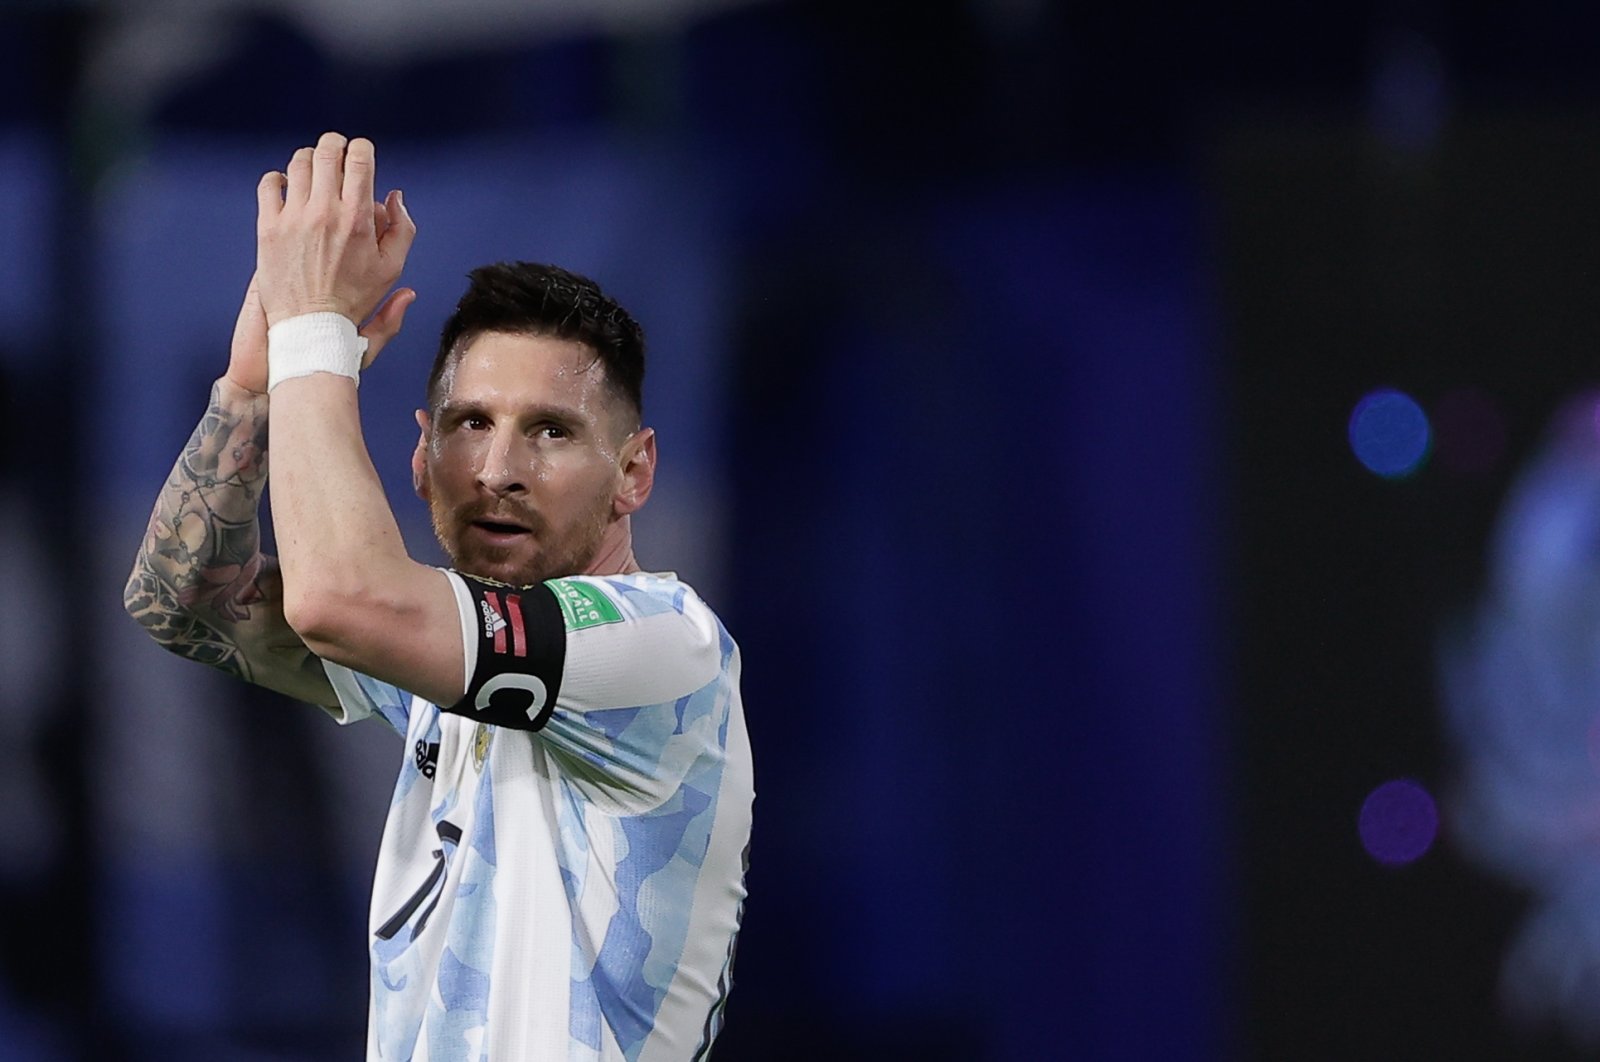 Lionel Messi celebrates after scoring in a World Cup qualifier match against Venezuela, Buenos Aires, Argentina, March 25, 2022. (EPA Photo)